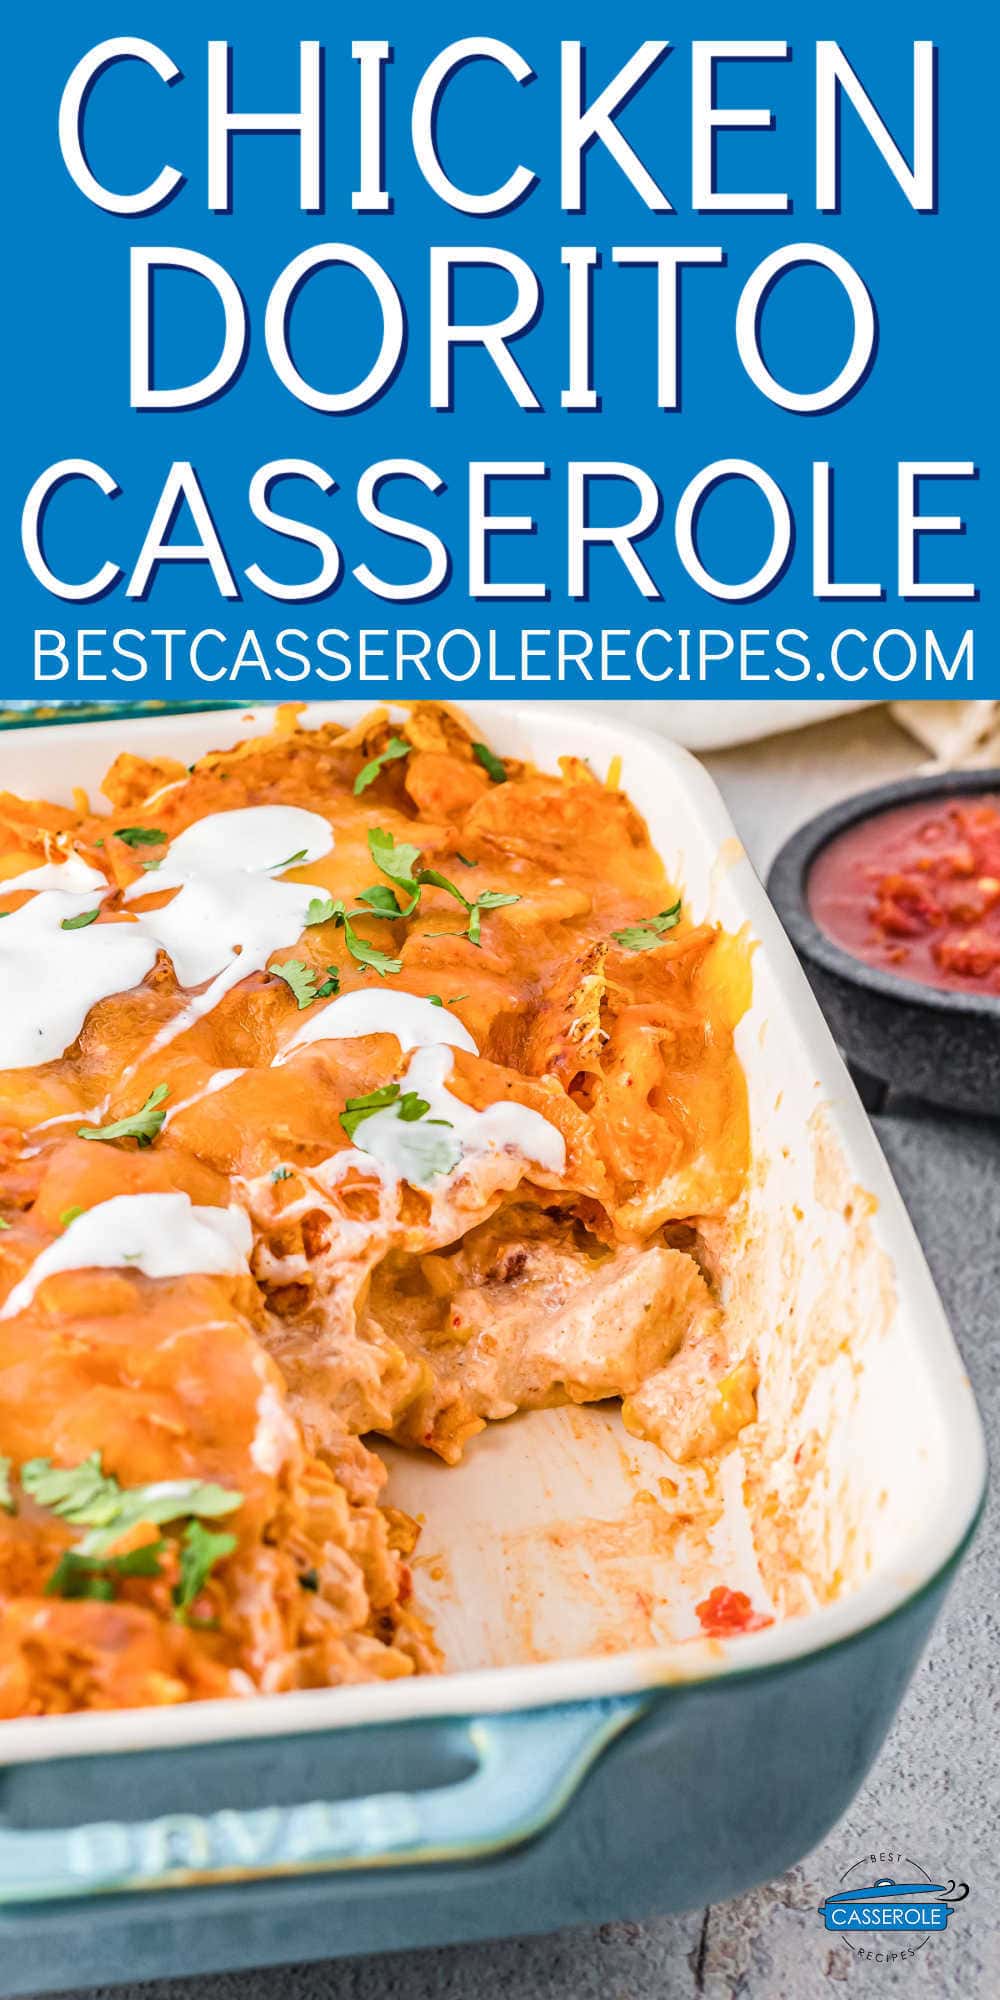 pan of casserole with blue banner and white text